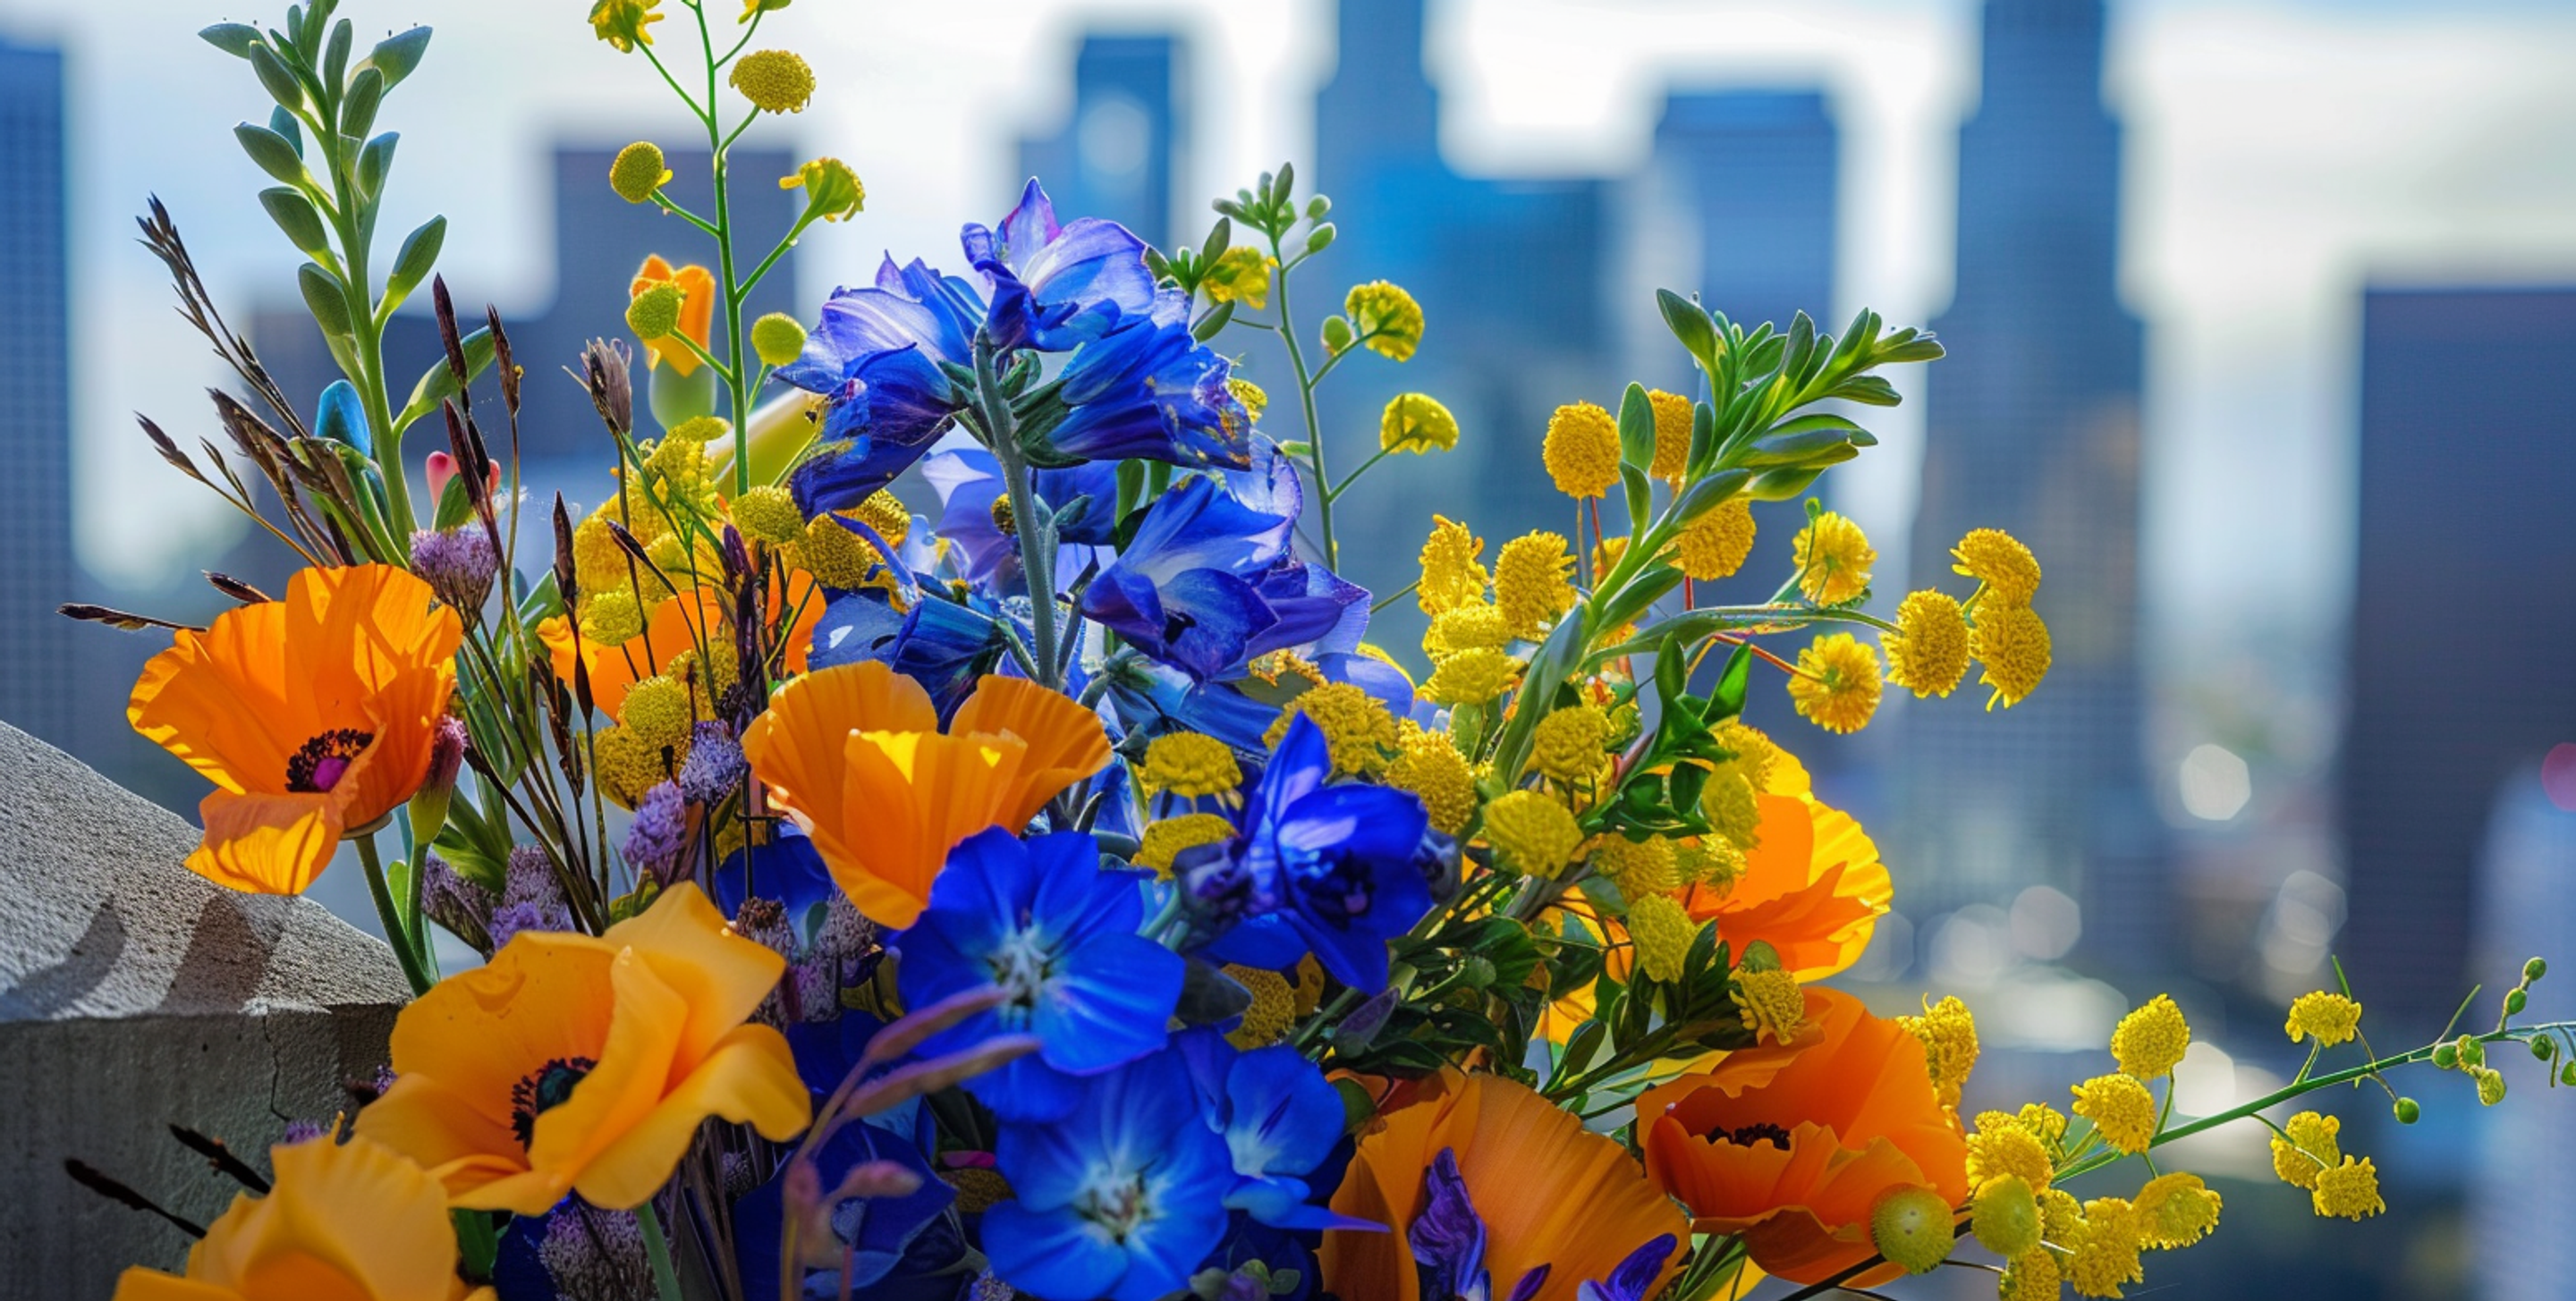 California Poppy, Blue Delphinium, Eucalyptus Leaves, and Yellow Flowers with the Los Angeles skyling in the background